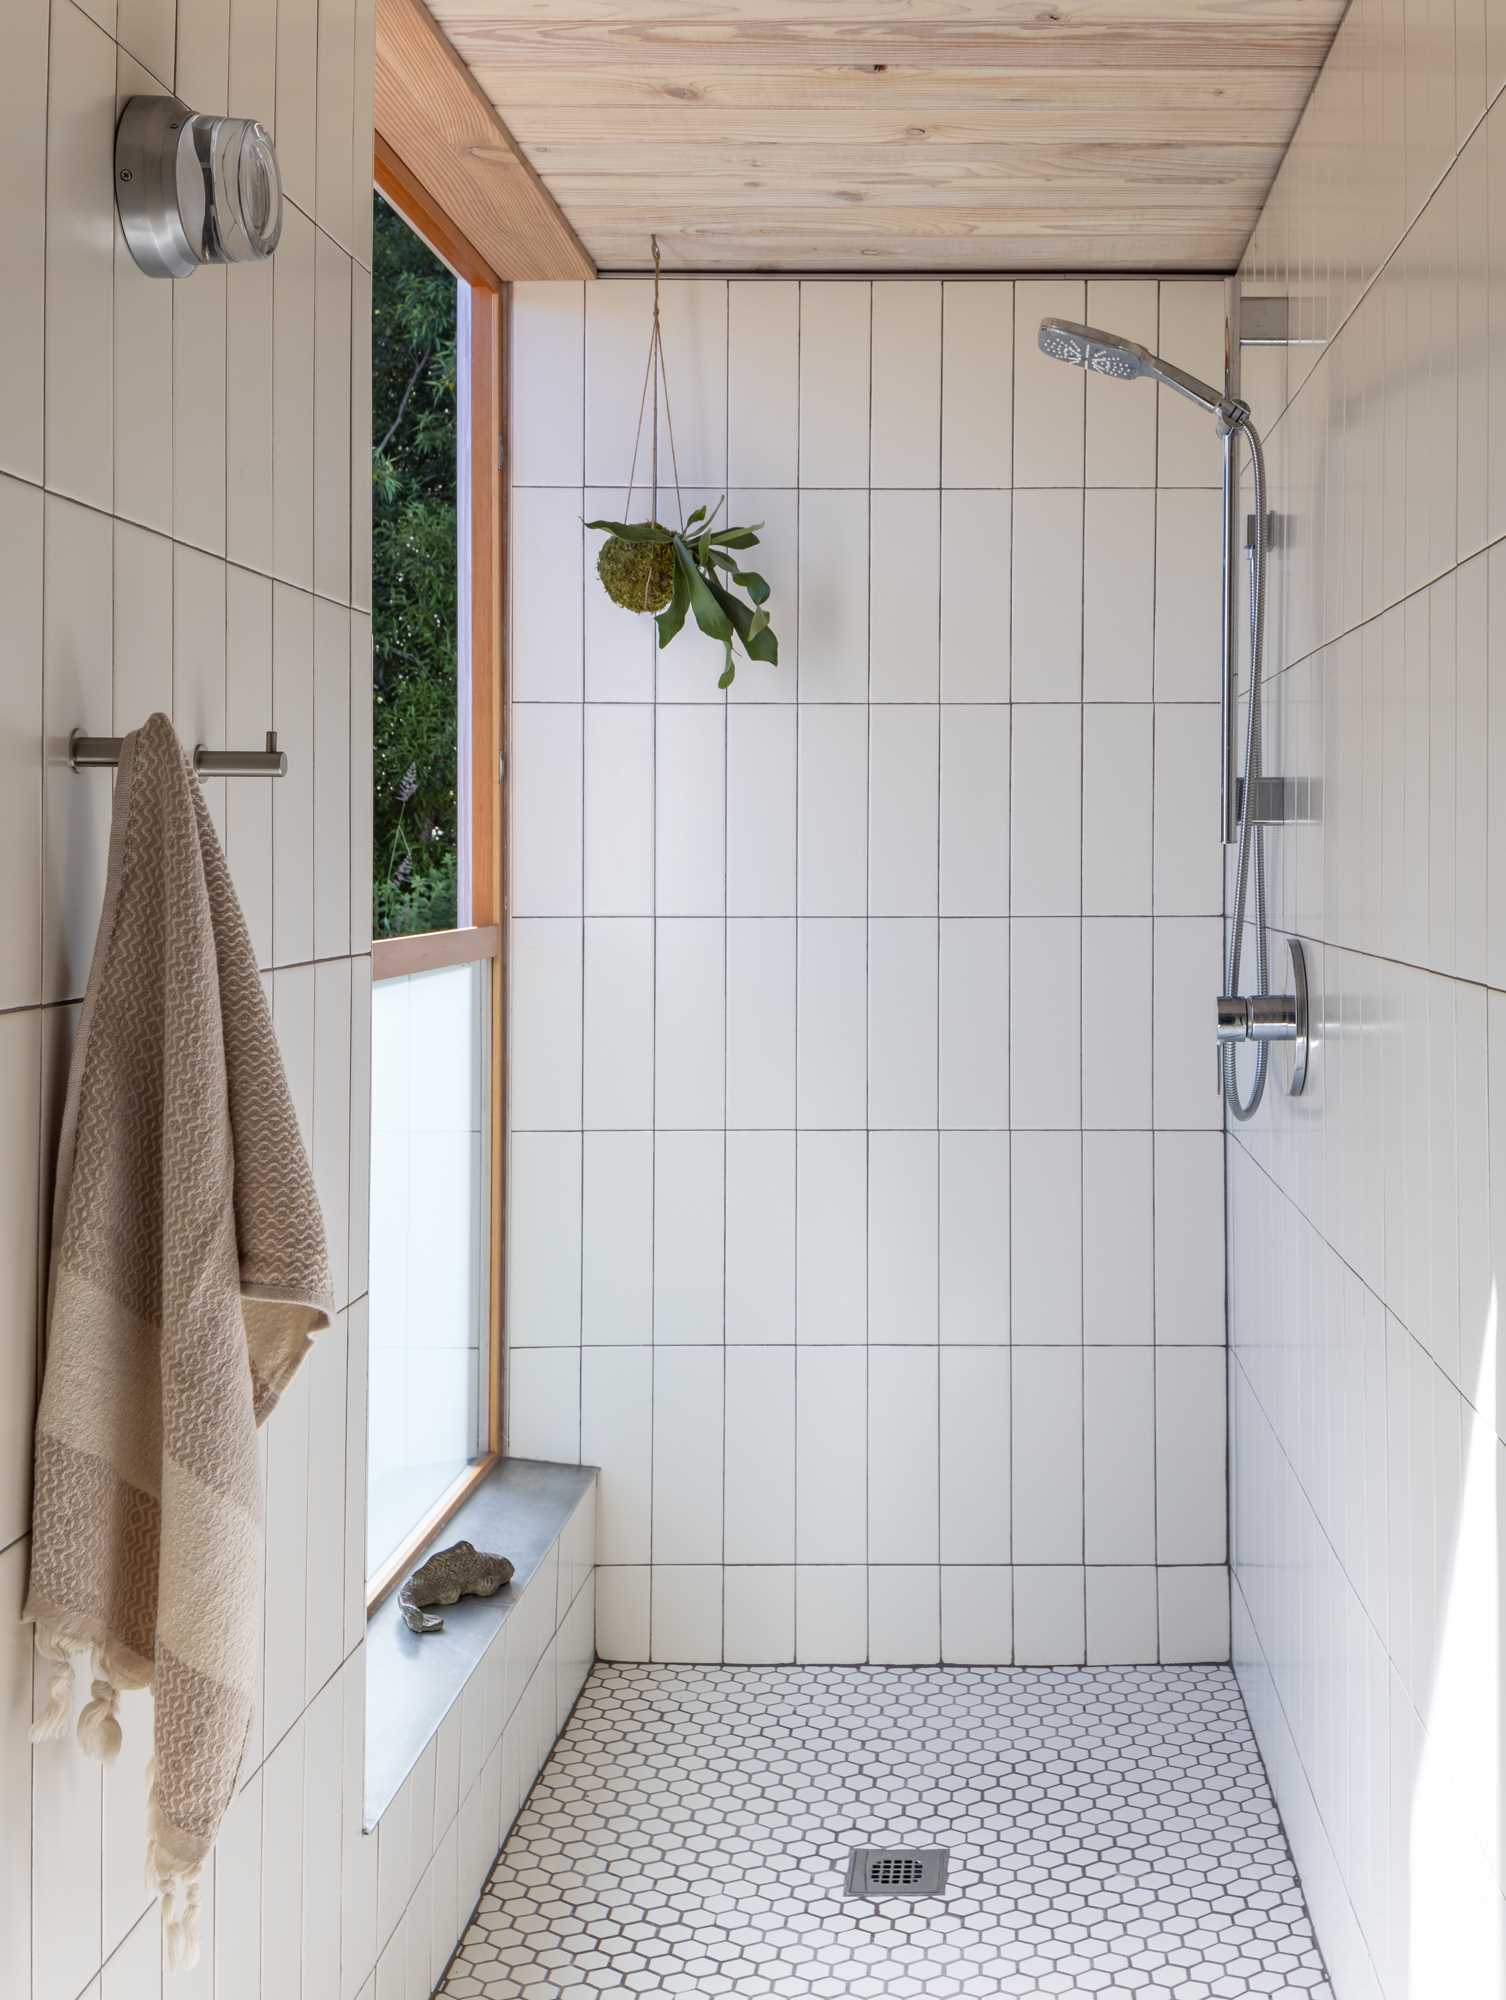 In this bathroom, the walls and floors of the shower are covered by tile, and a window opens for tree views.